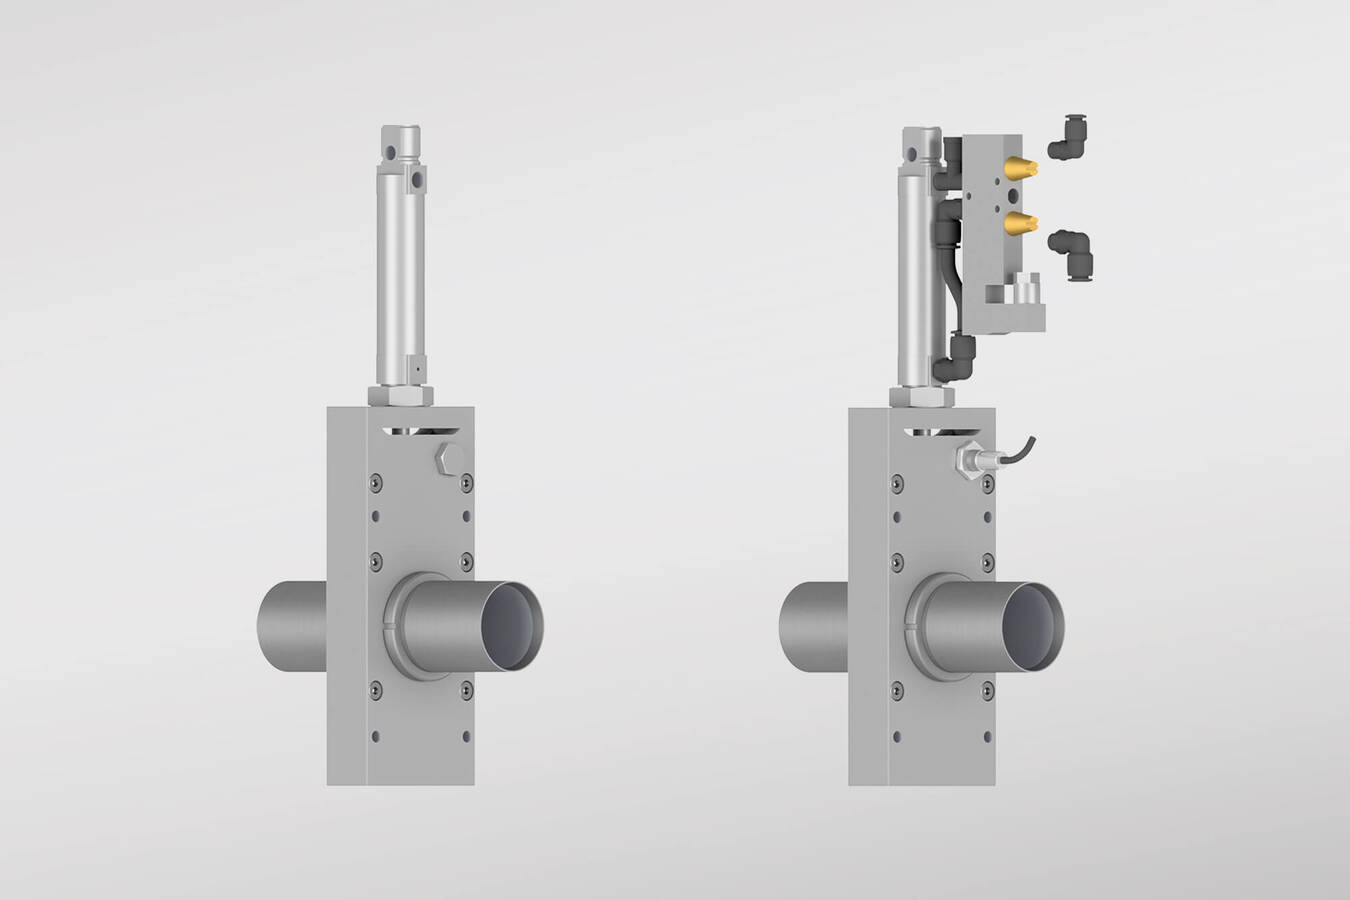 Achberg optimizes slide valves The optimized product is named AS.11 and offers improved position sensing of the slide valve compared to the previous model.